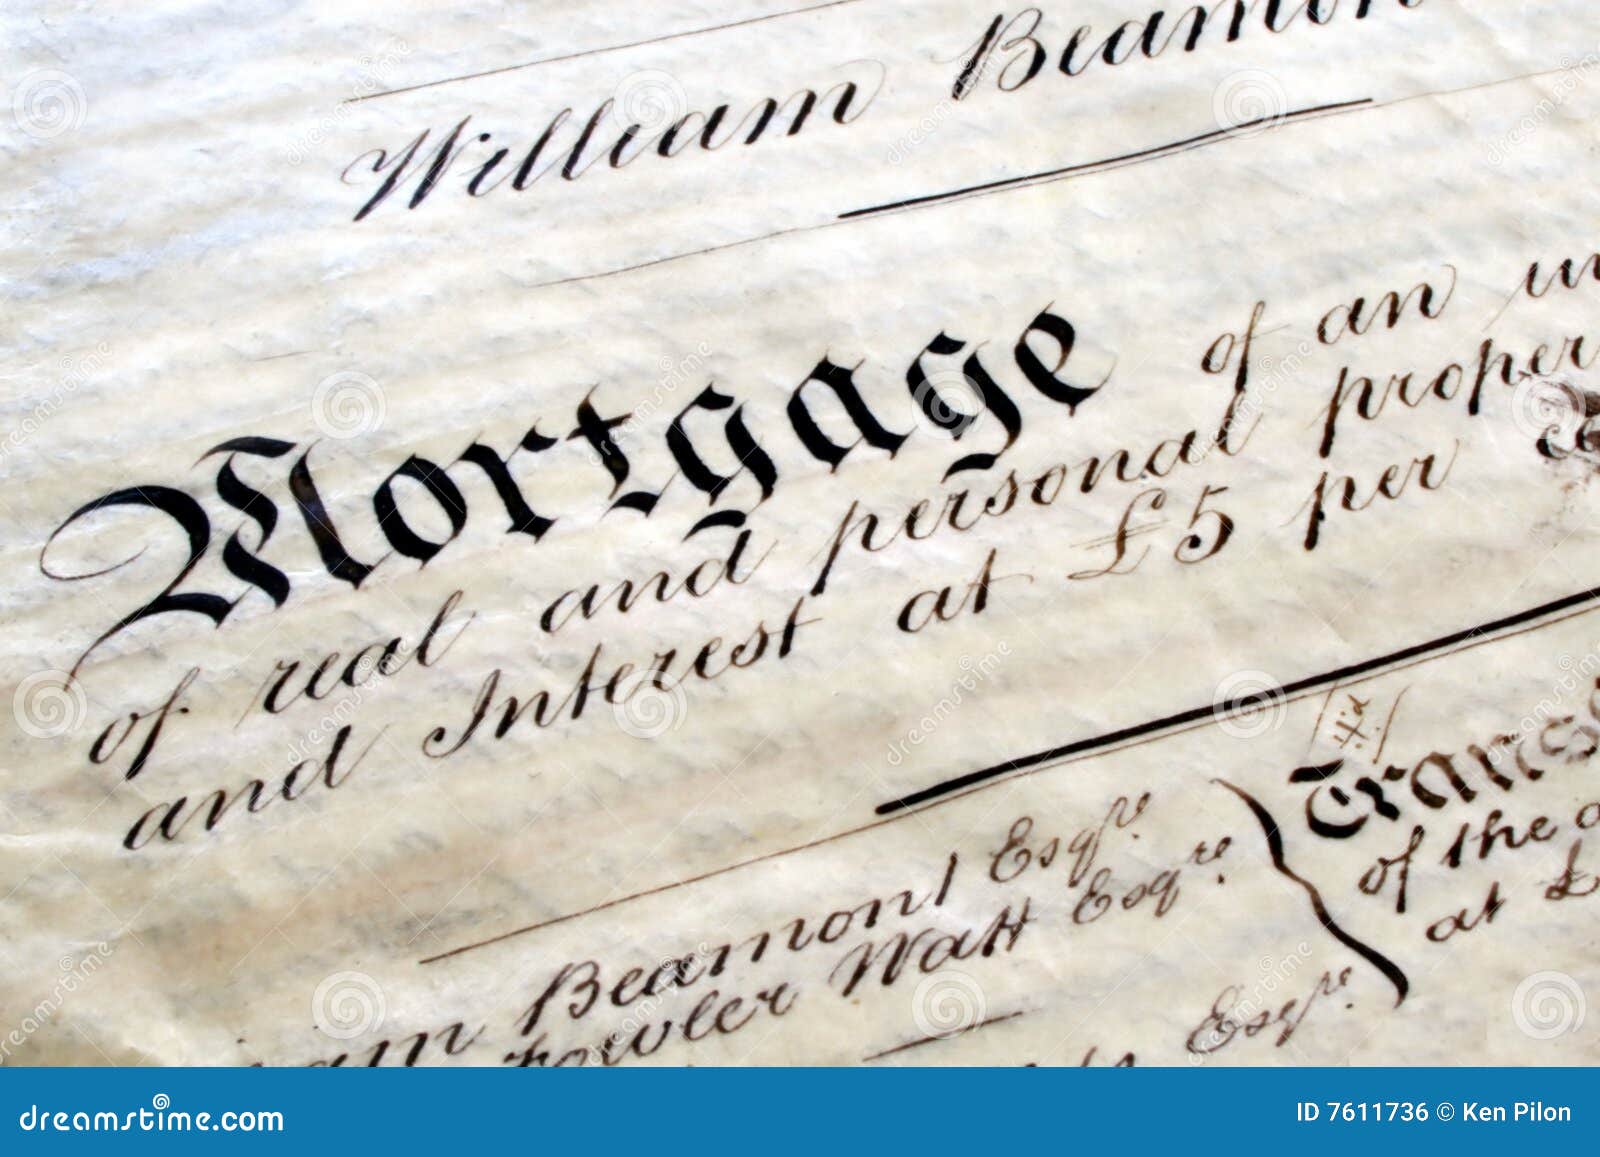 old mortgage deed